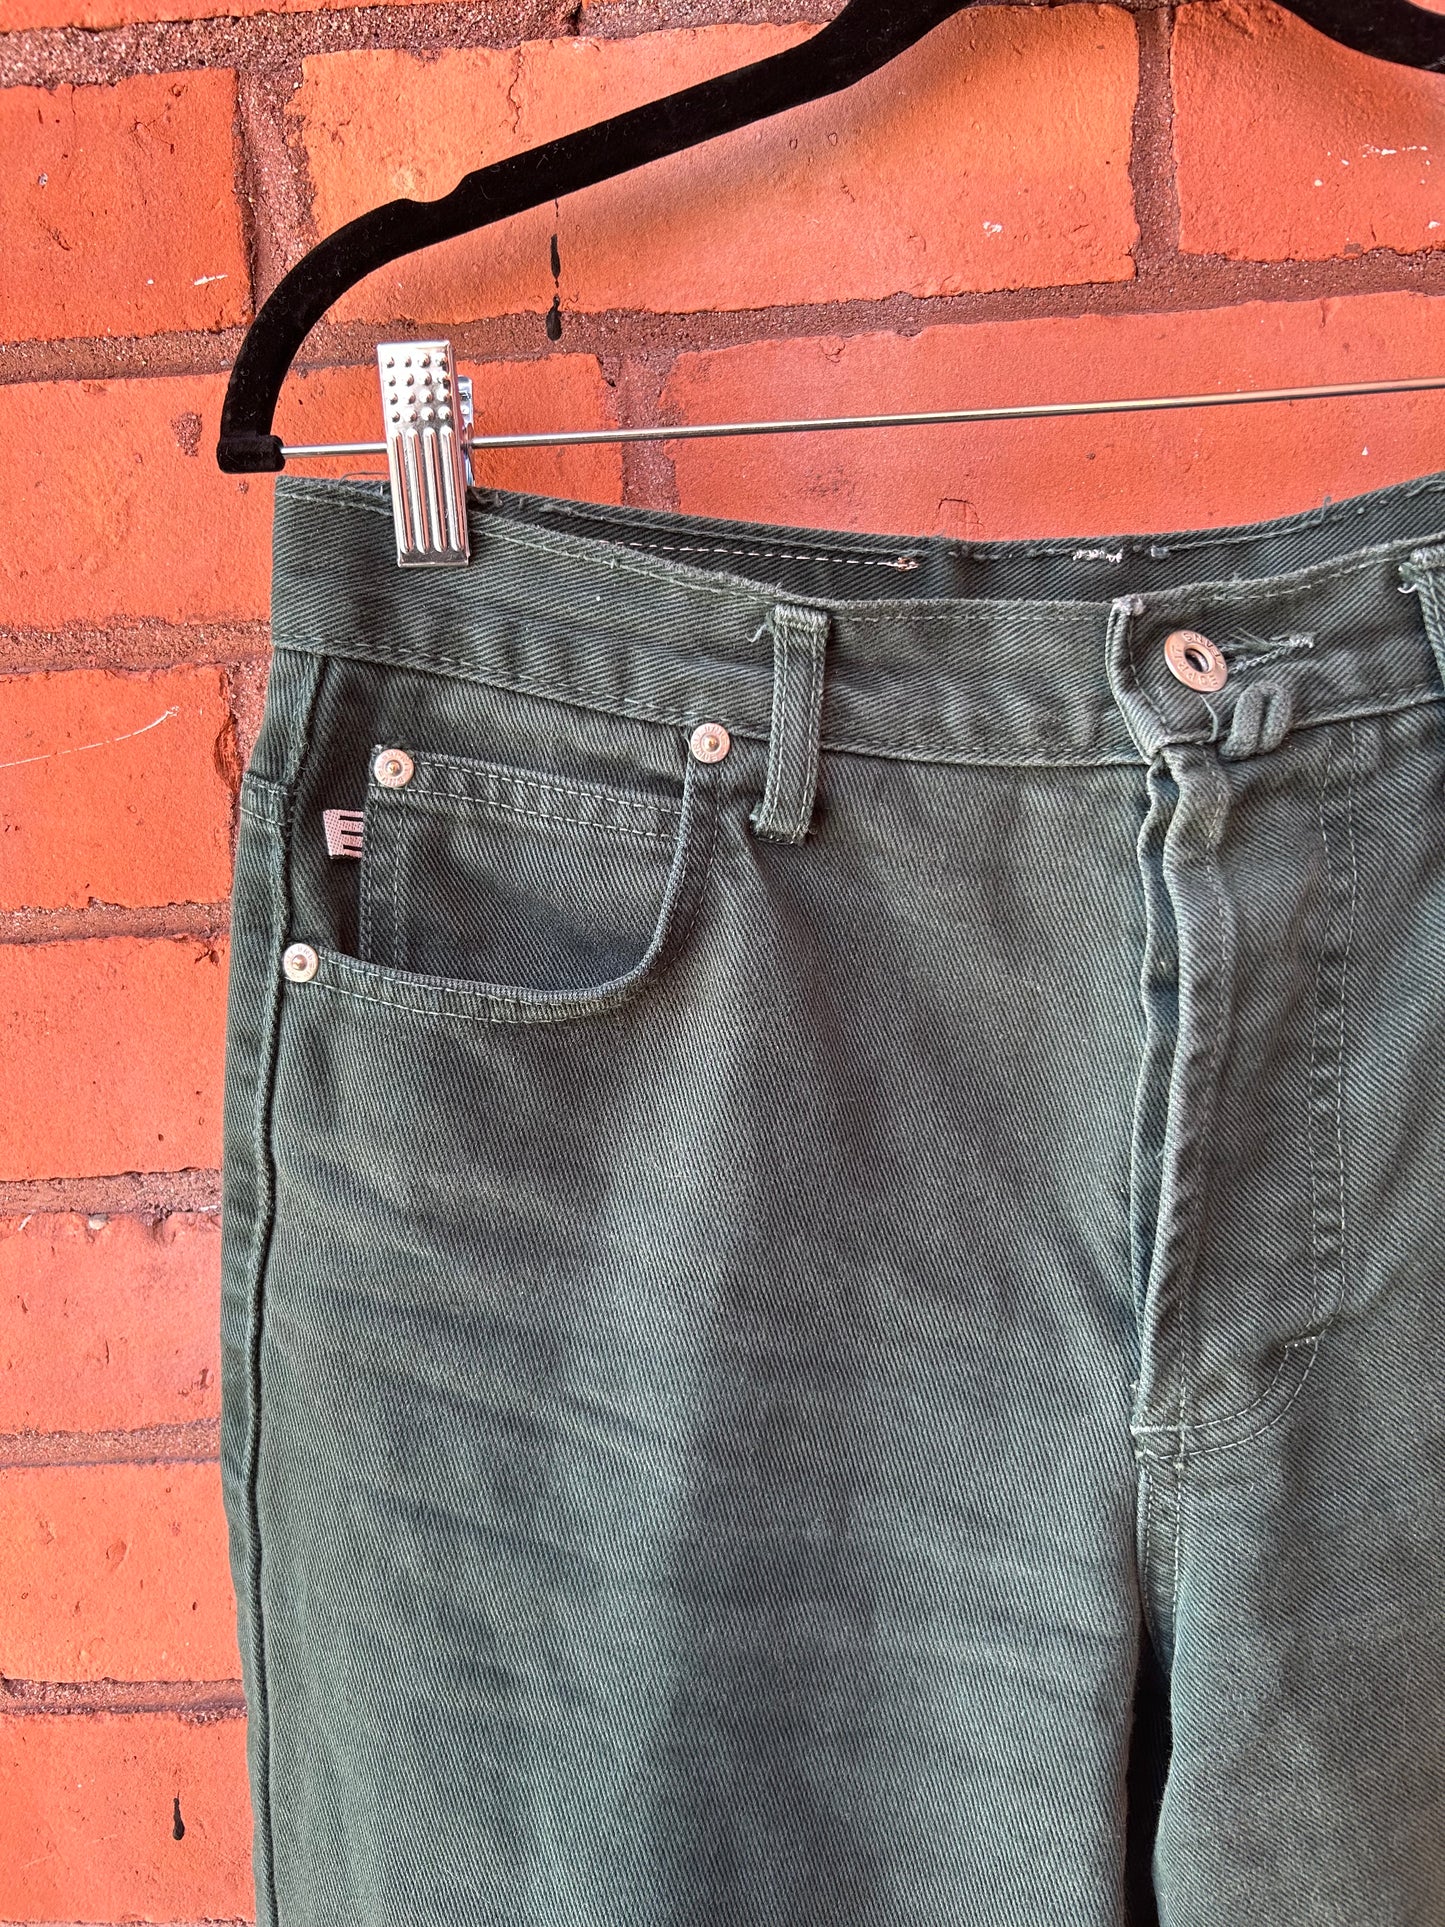 90’s Vintage Forest Green Tapered Jeans / 30 Waist